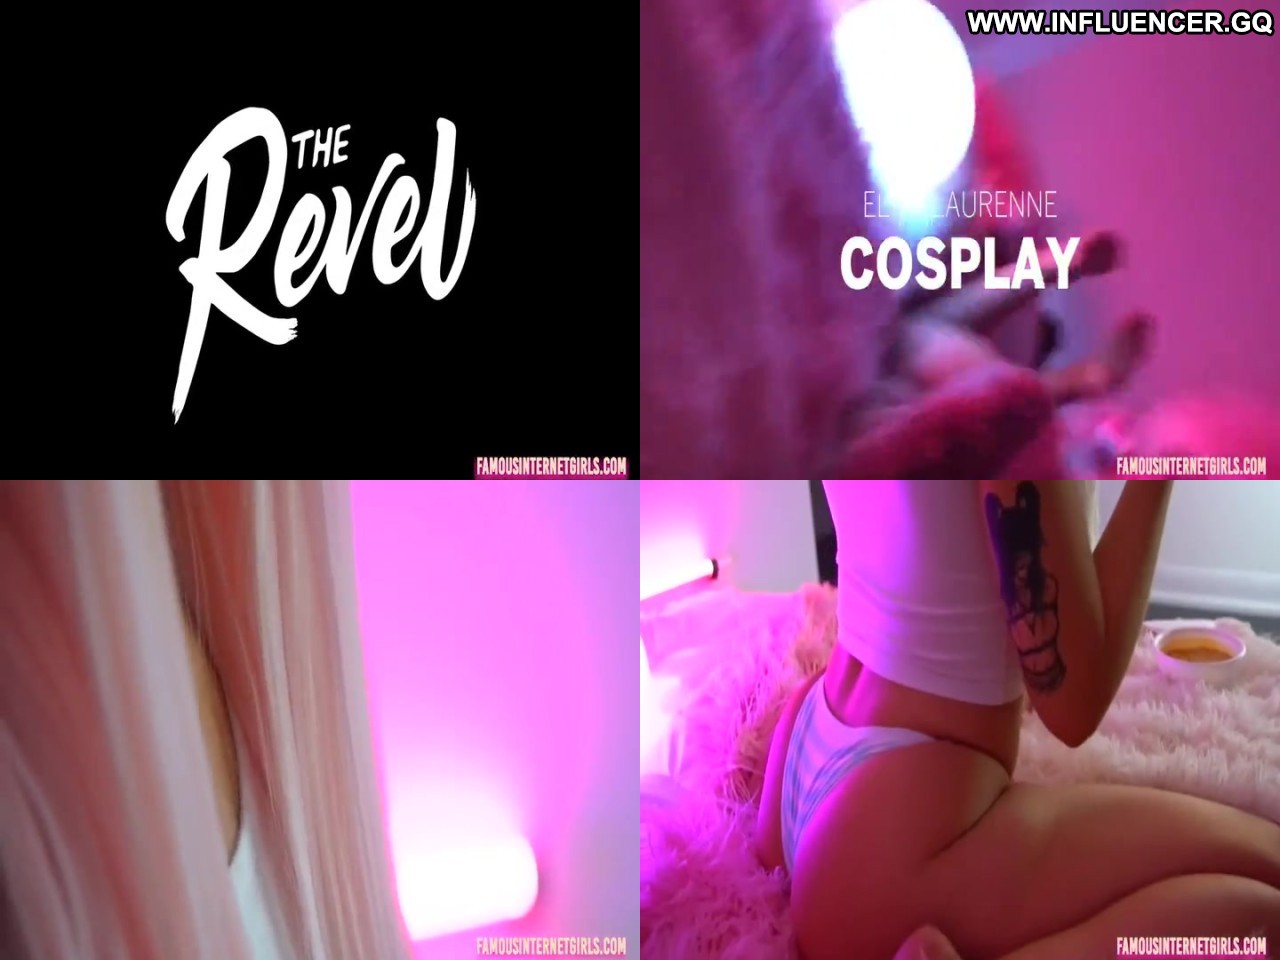 Elise Laurenne Cosplay Video Straight Porn Full Hot Influencer Hot Nude